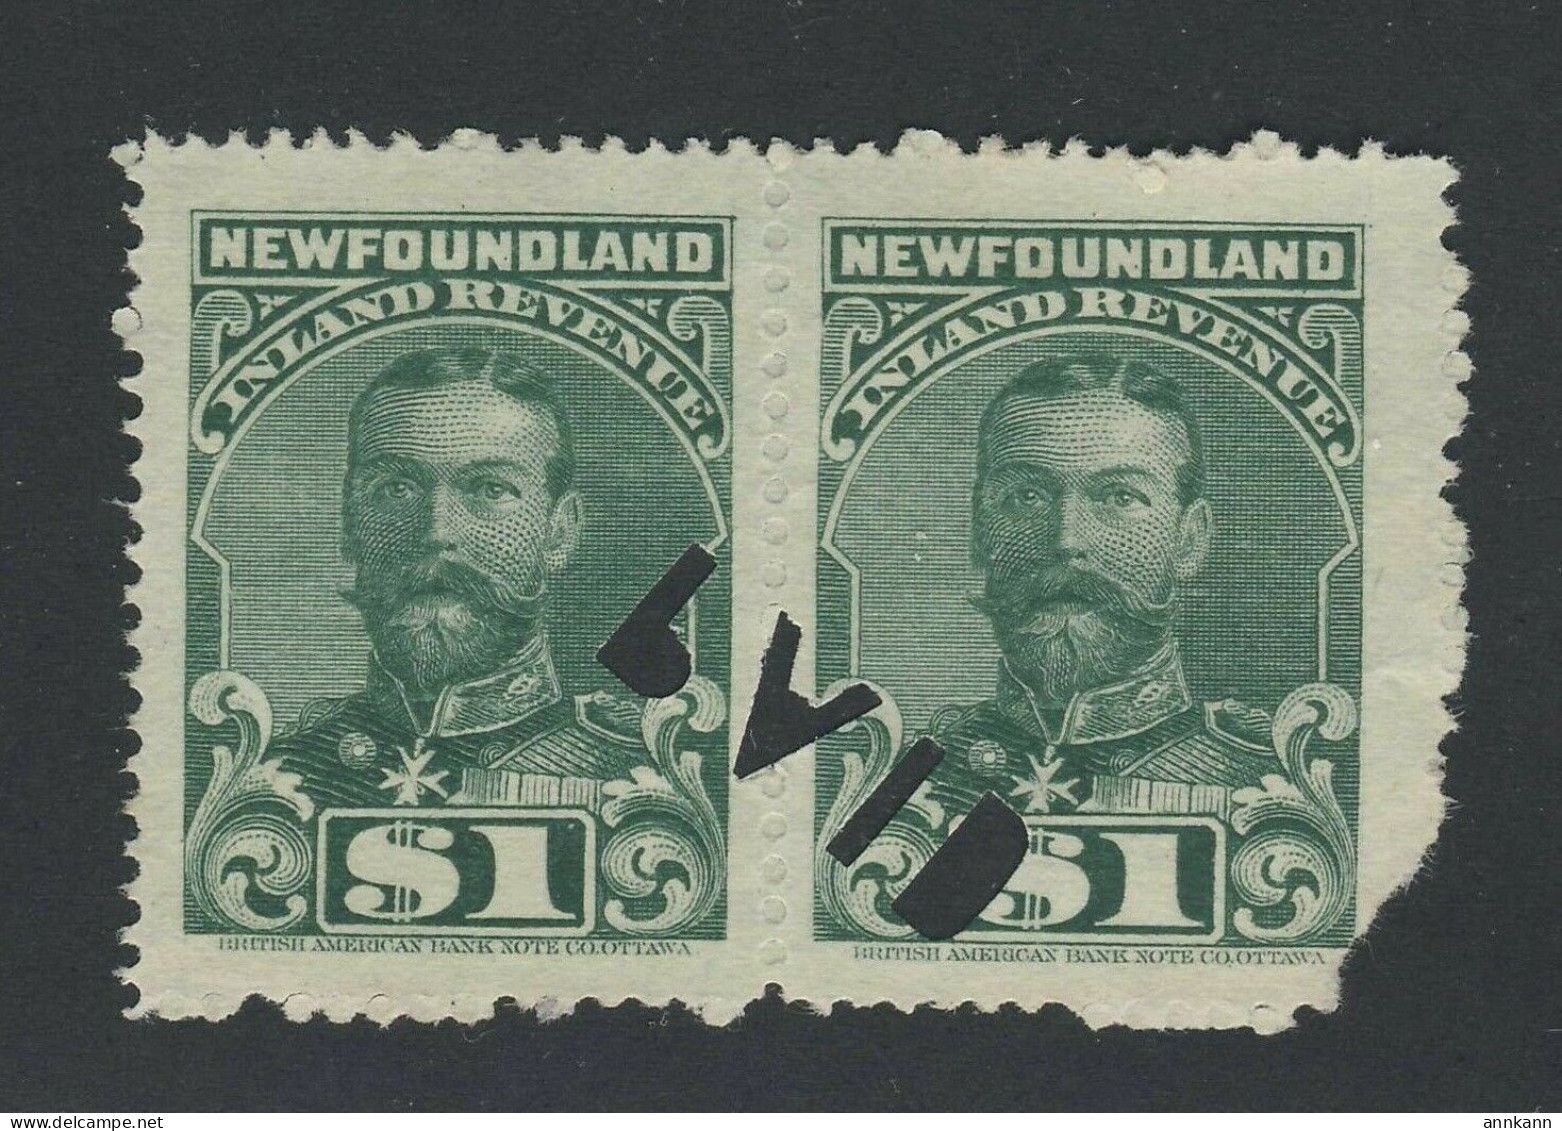 2x Newfoundland Used Inland Revenue Stamps 1910 George V Pair NFR 20-$1.00 - Fiscaux